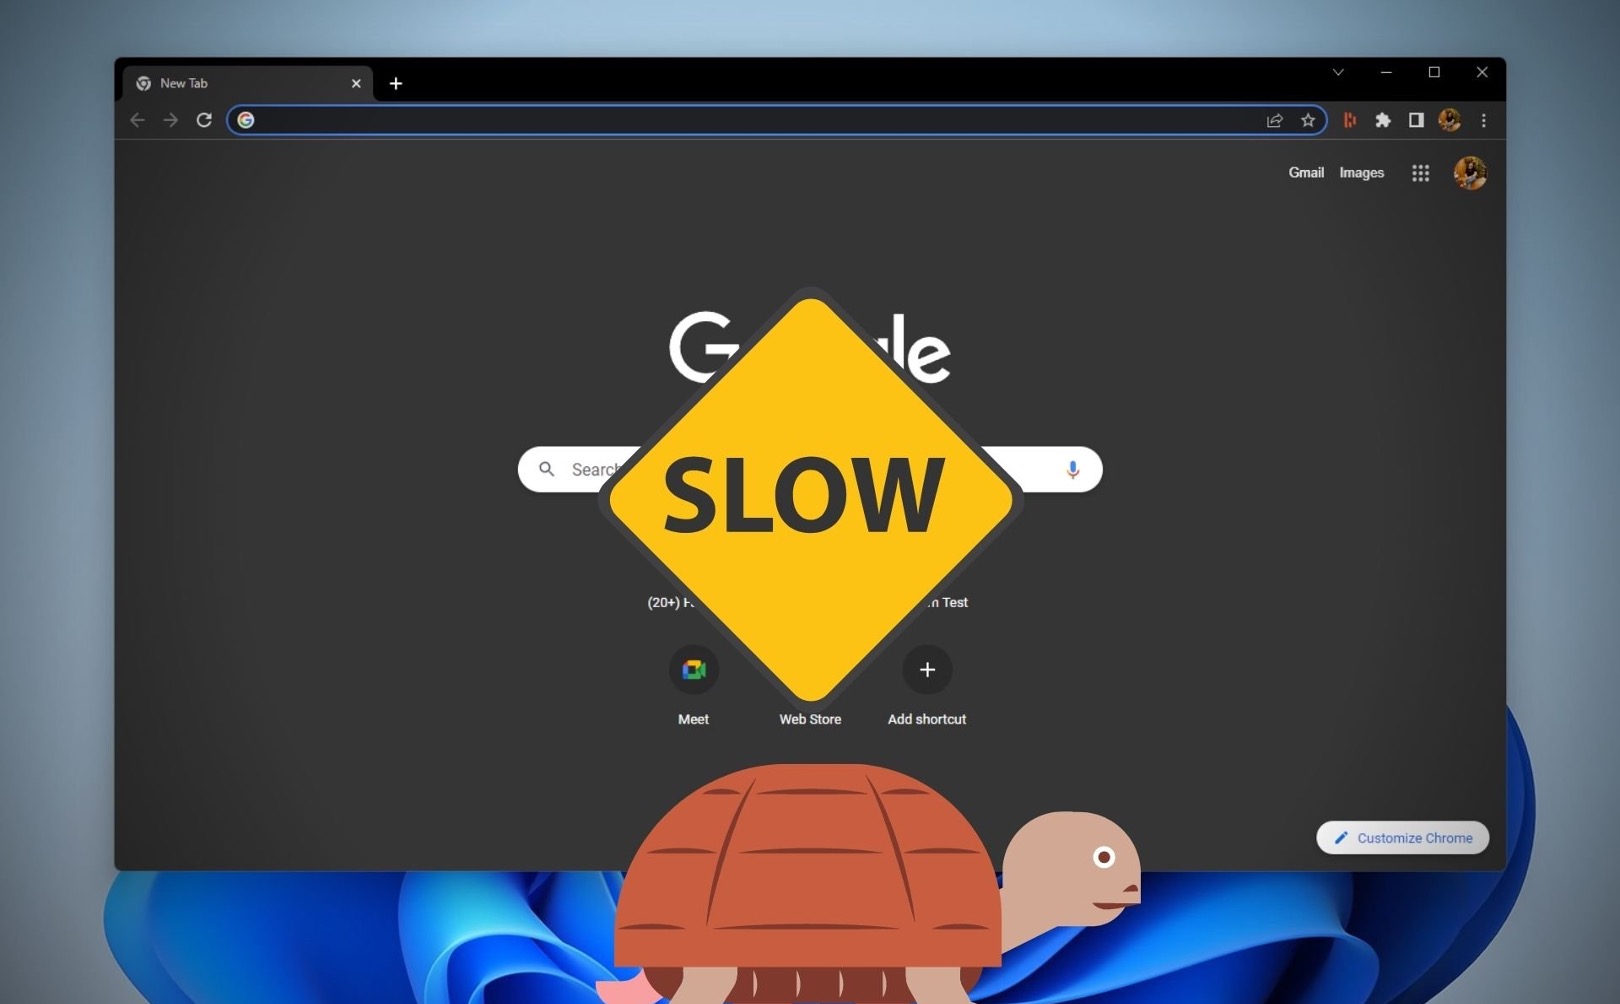 Why Is My Chrome Running So Slow?